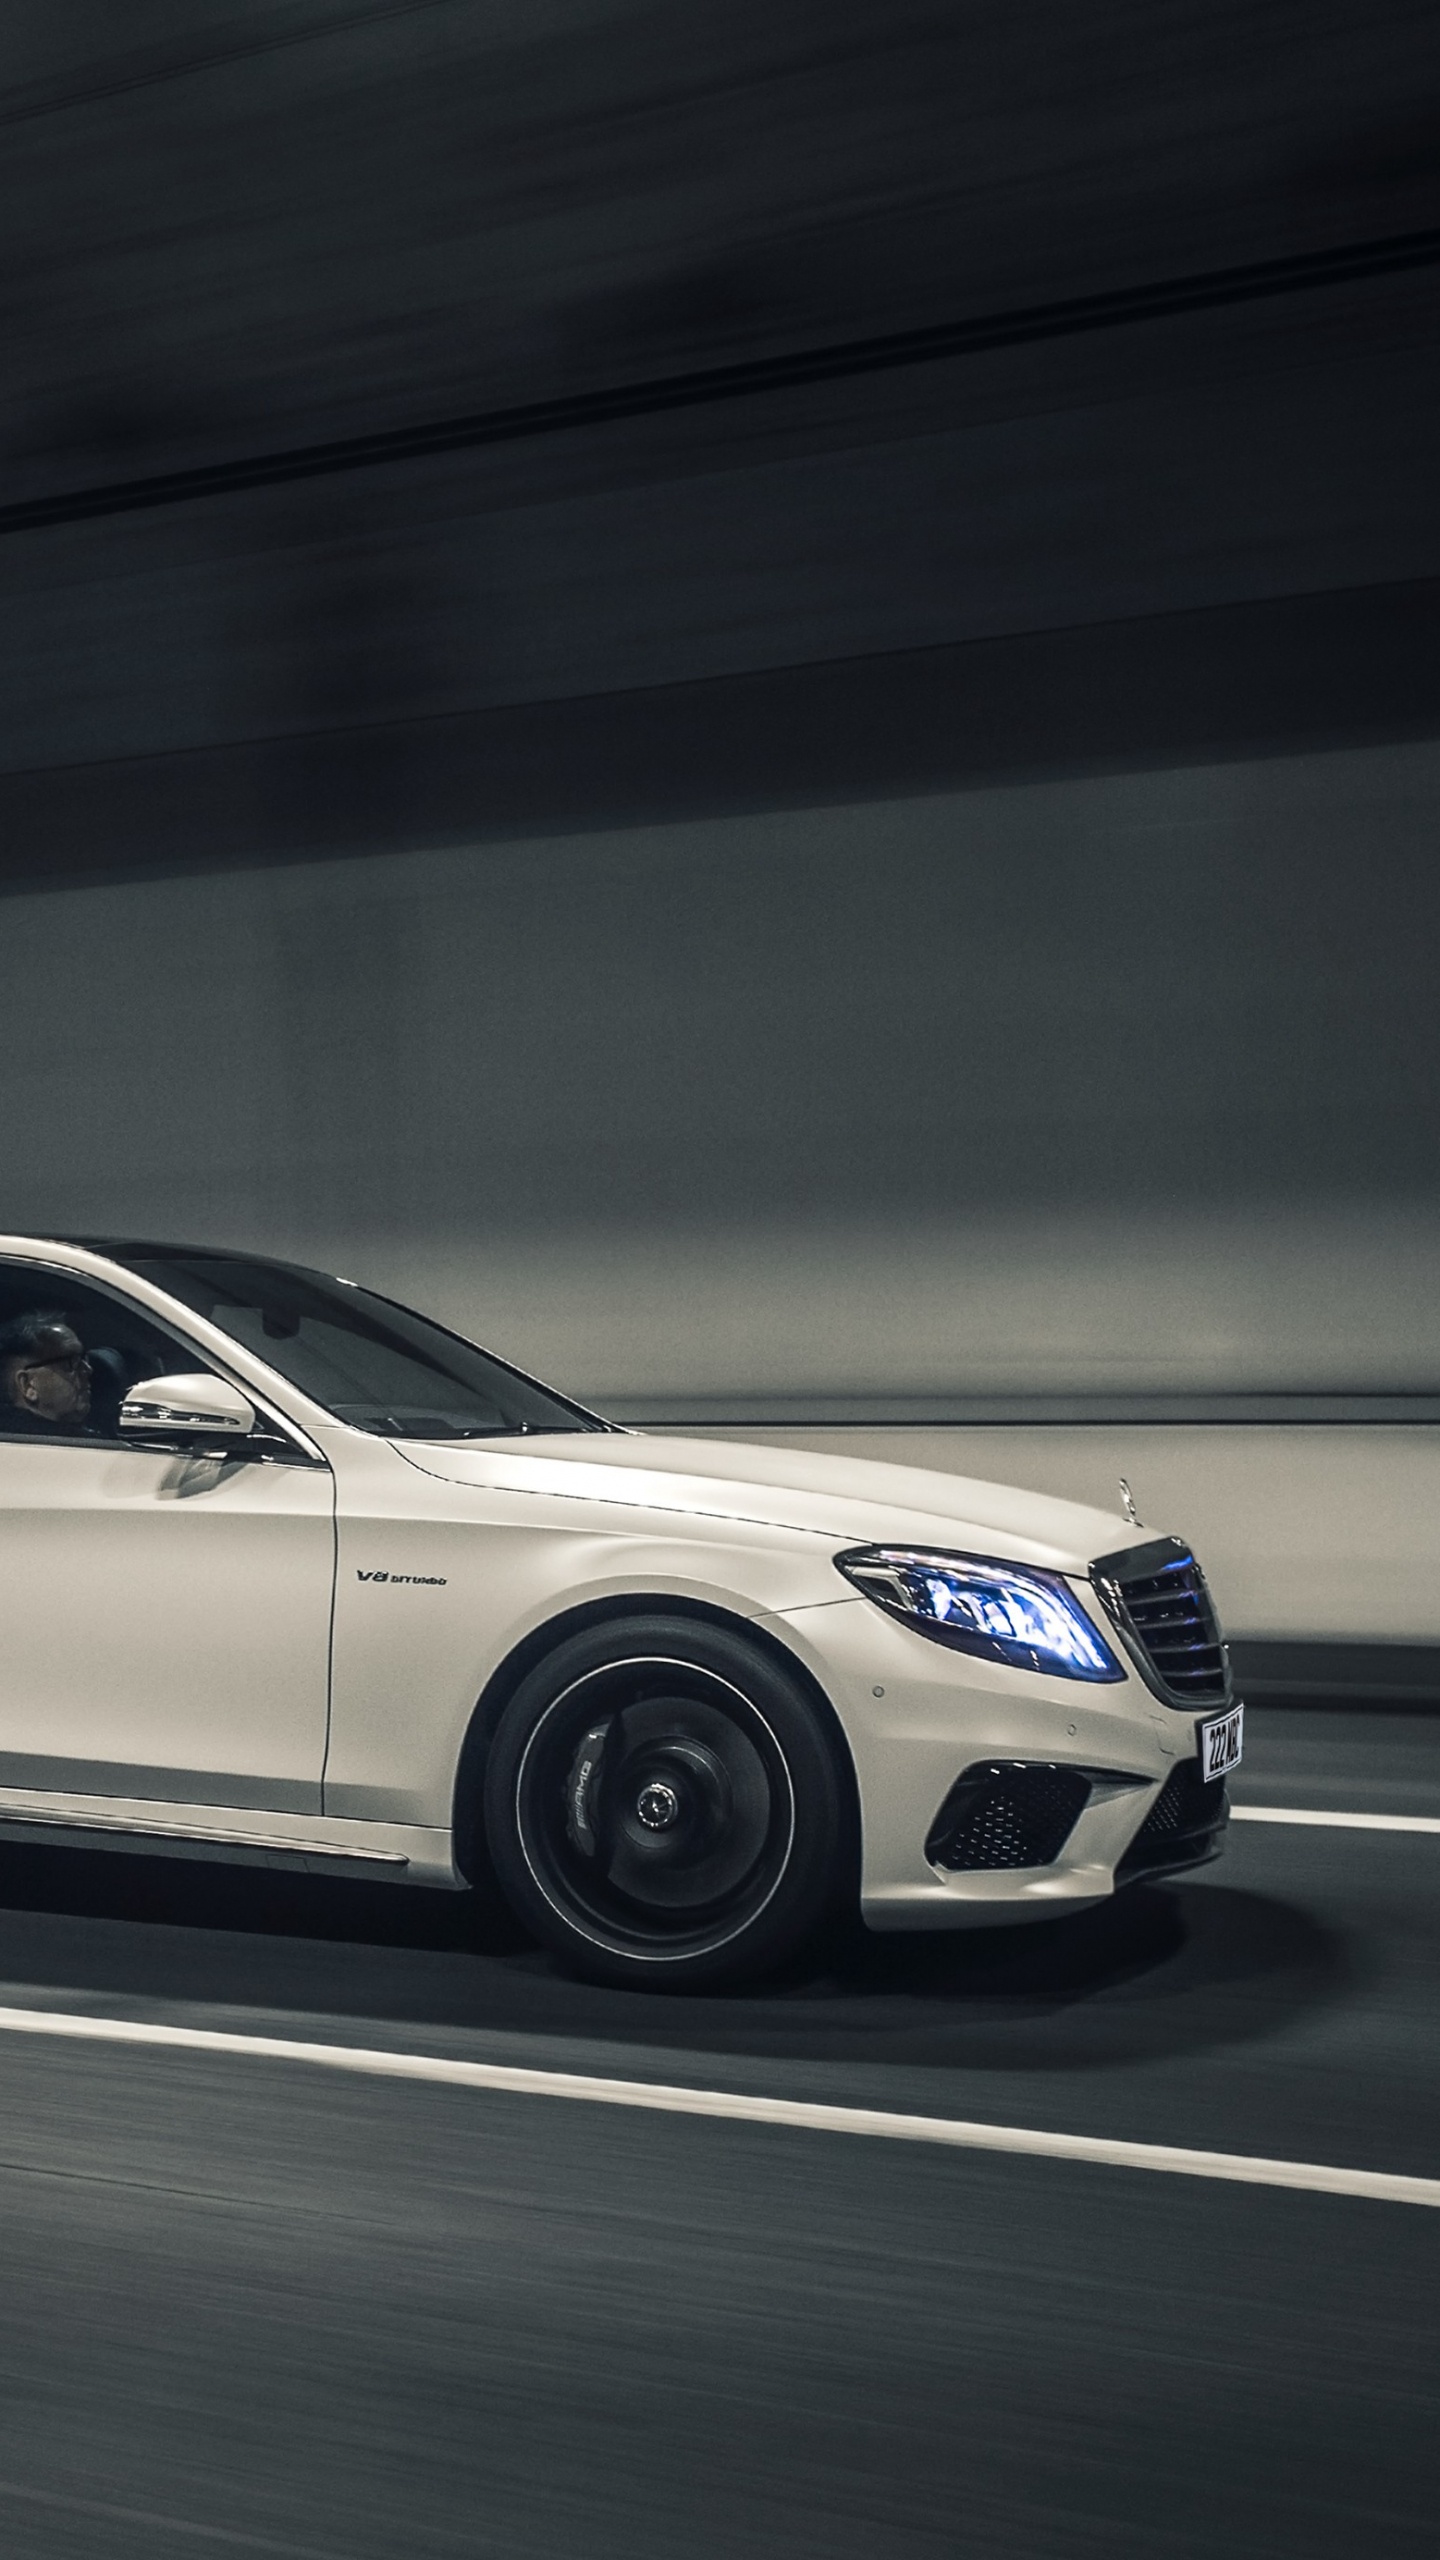 White Mercedes Benz Coupe on Road. Wallpaper in 1440x2560 Resolution